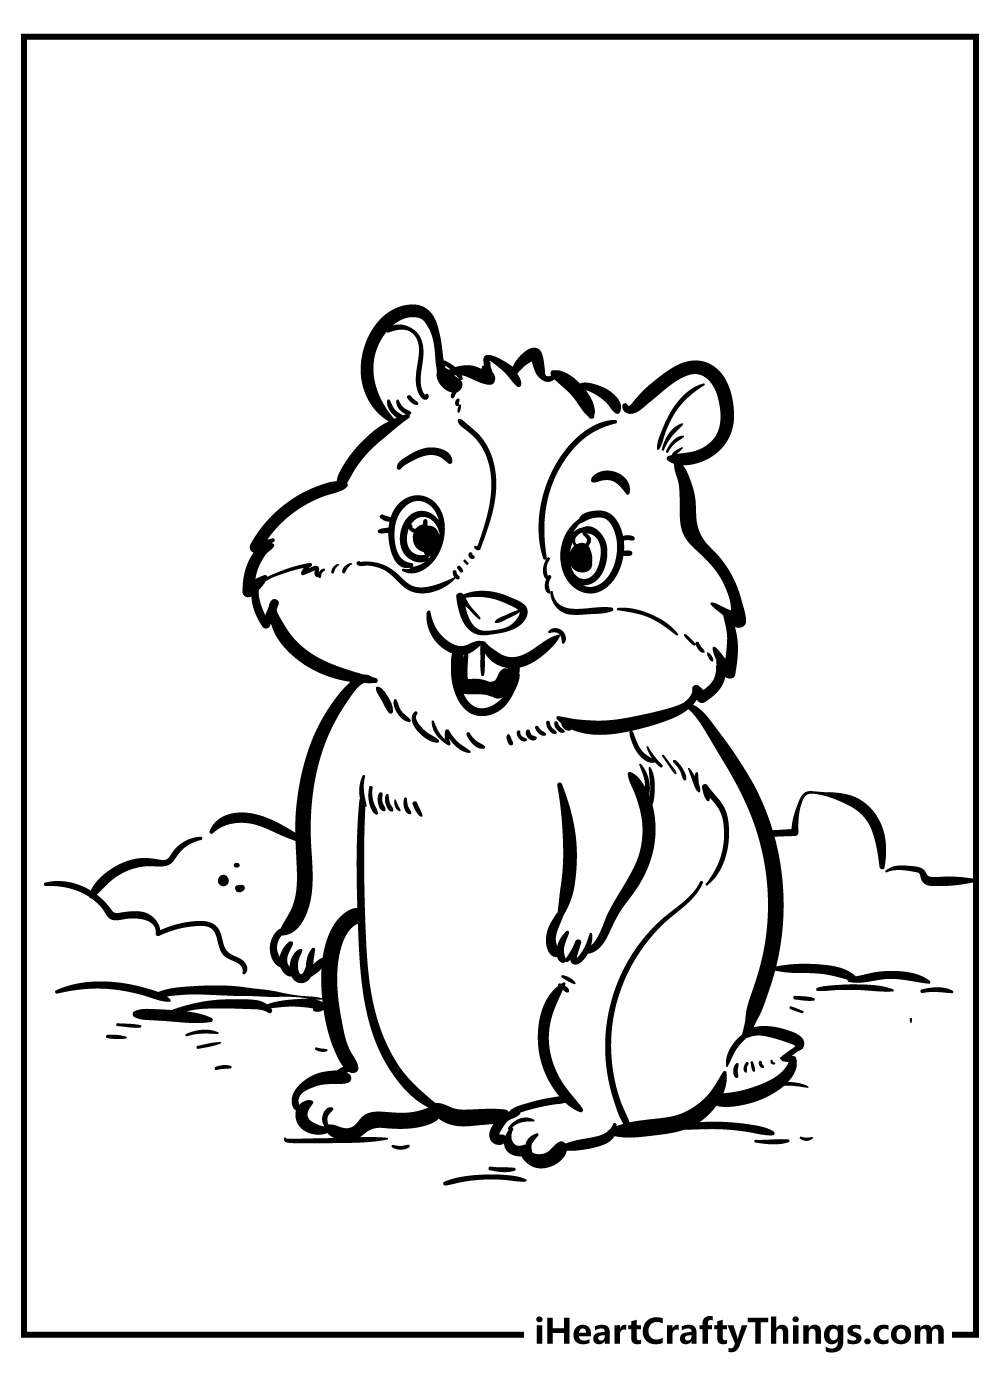 Hamster coloring pages free printables